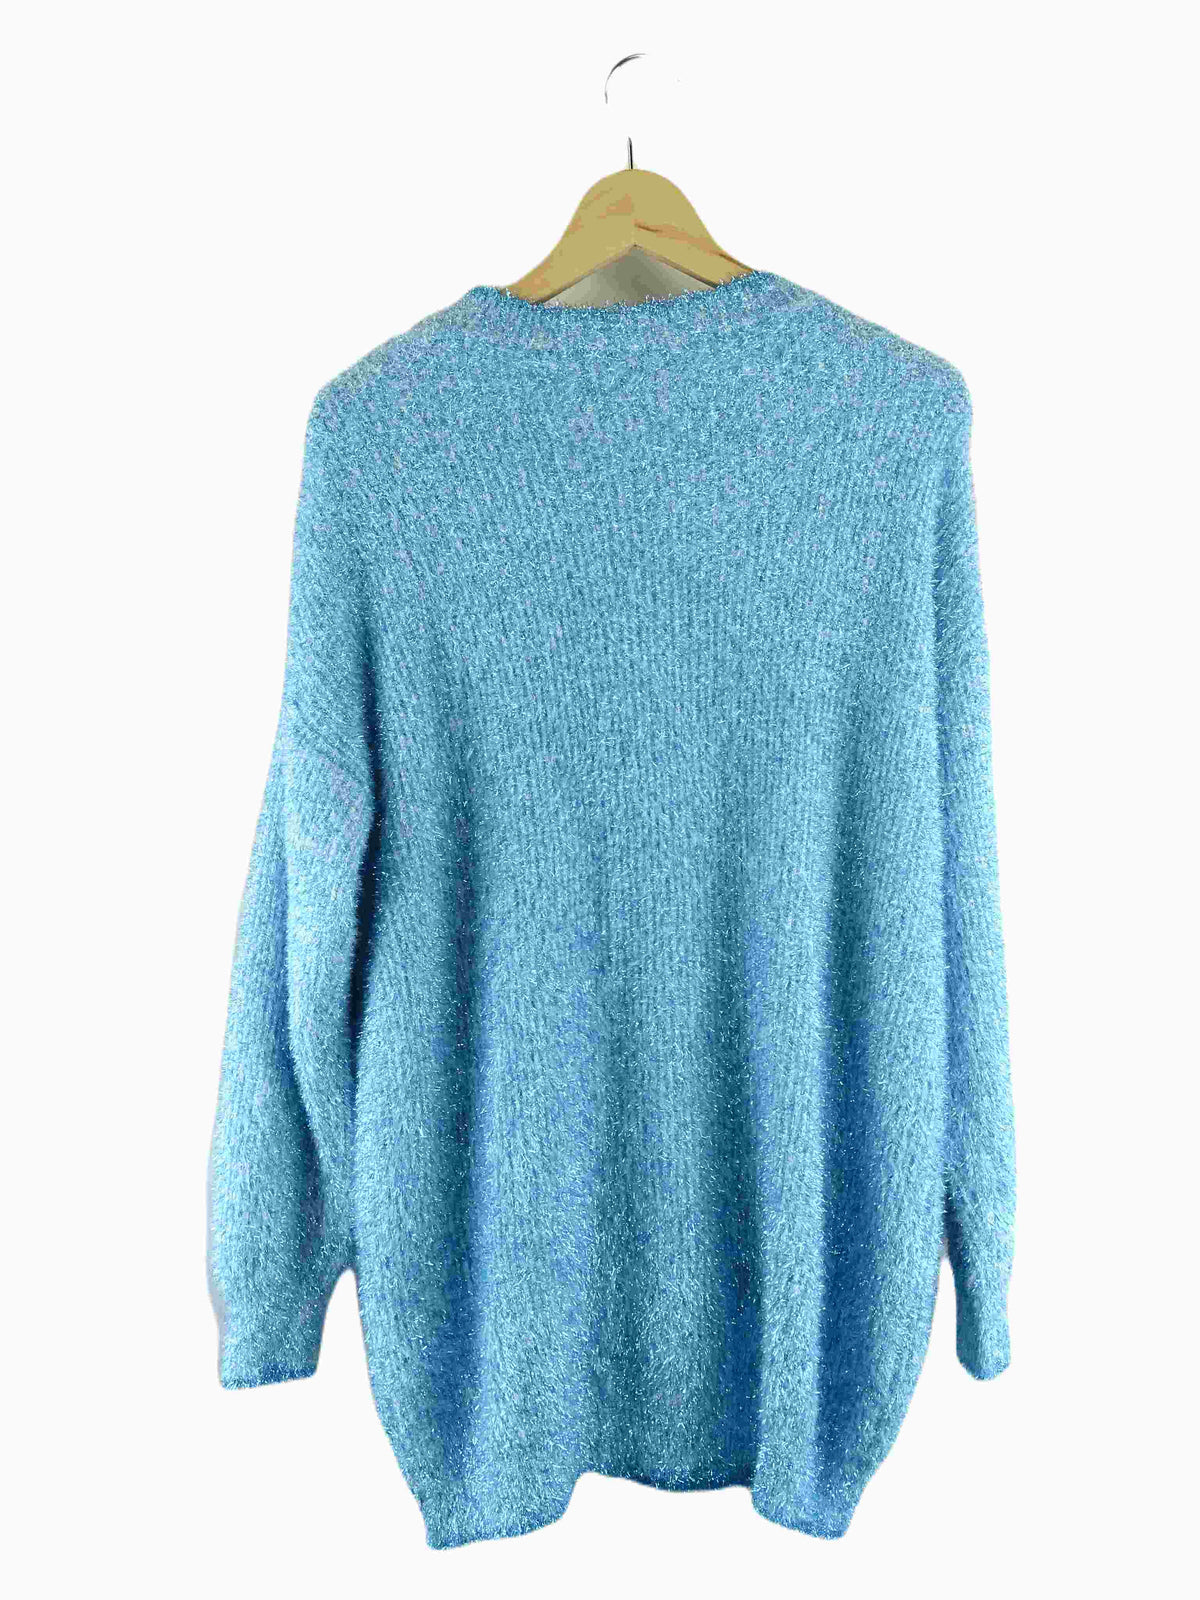 Tully Blue Sparkle Jumper S